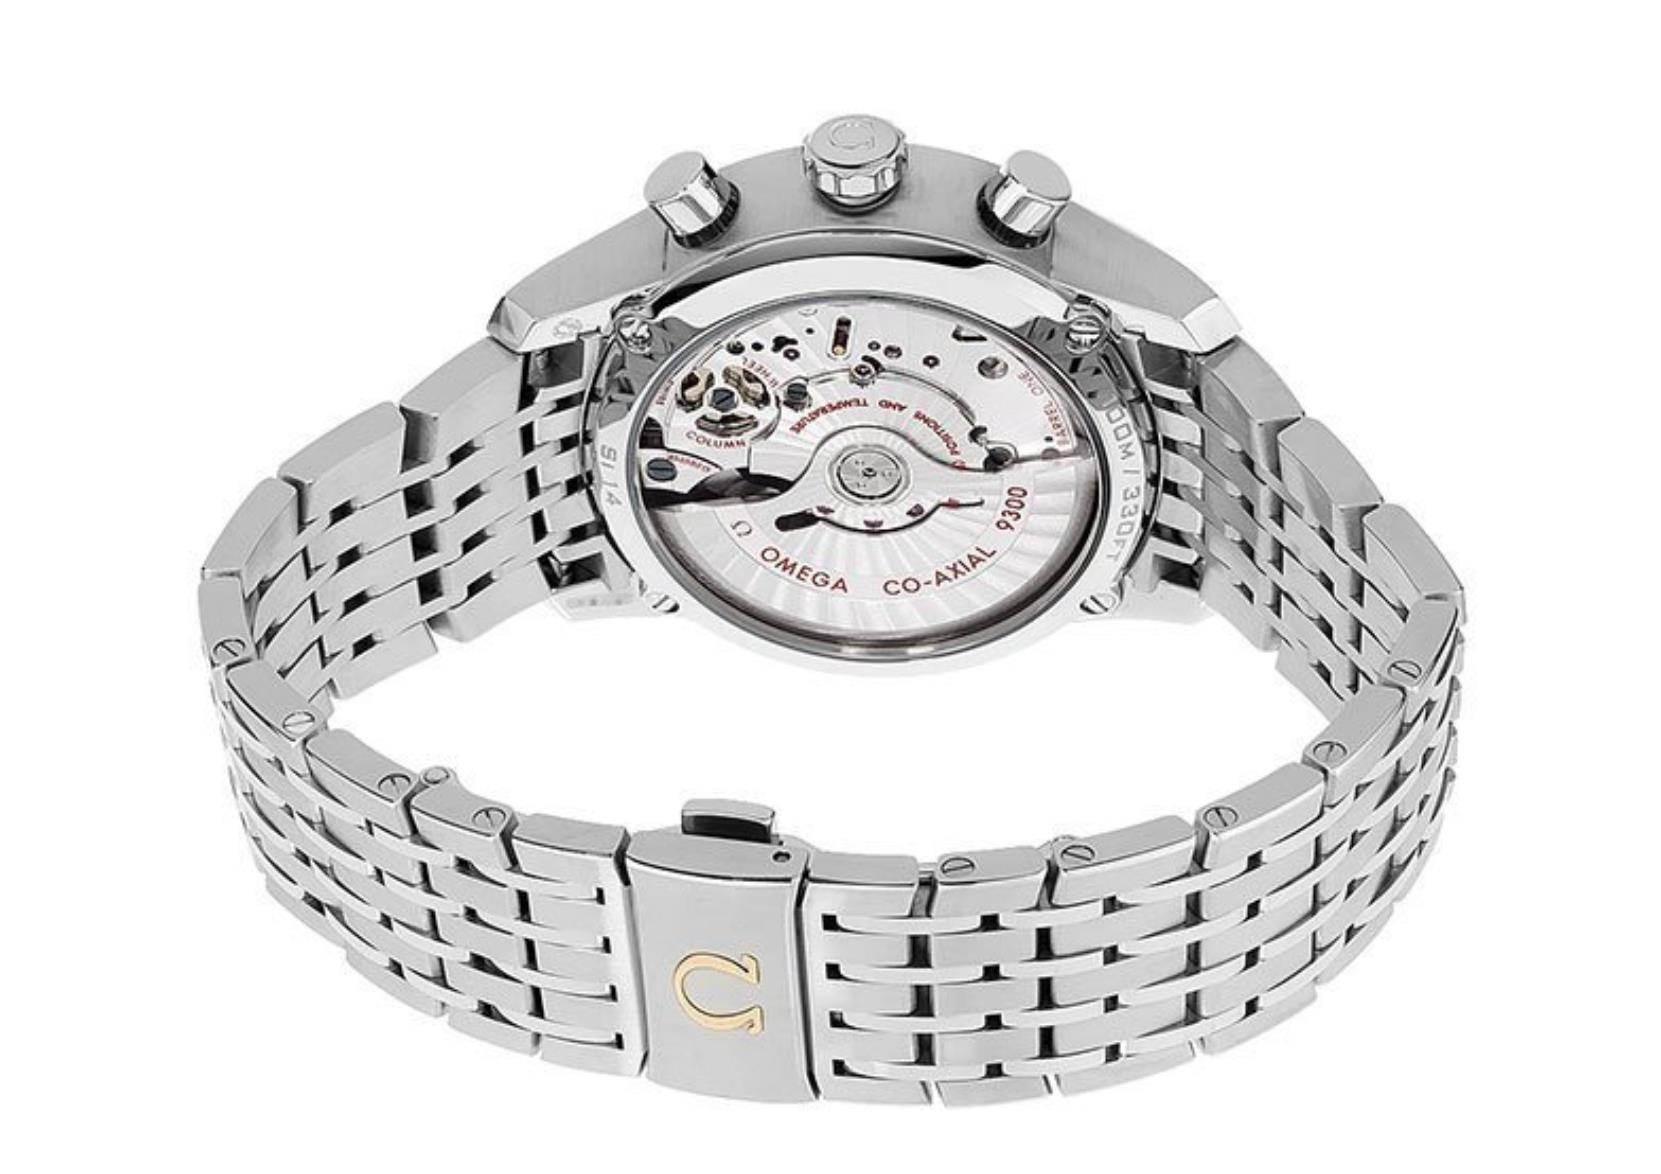 The stainless steel fake watch is equipped with Swiss movement.